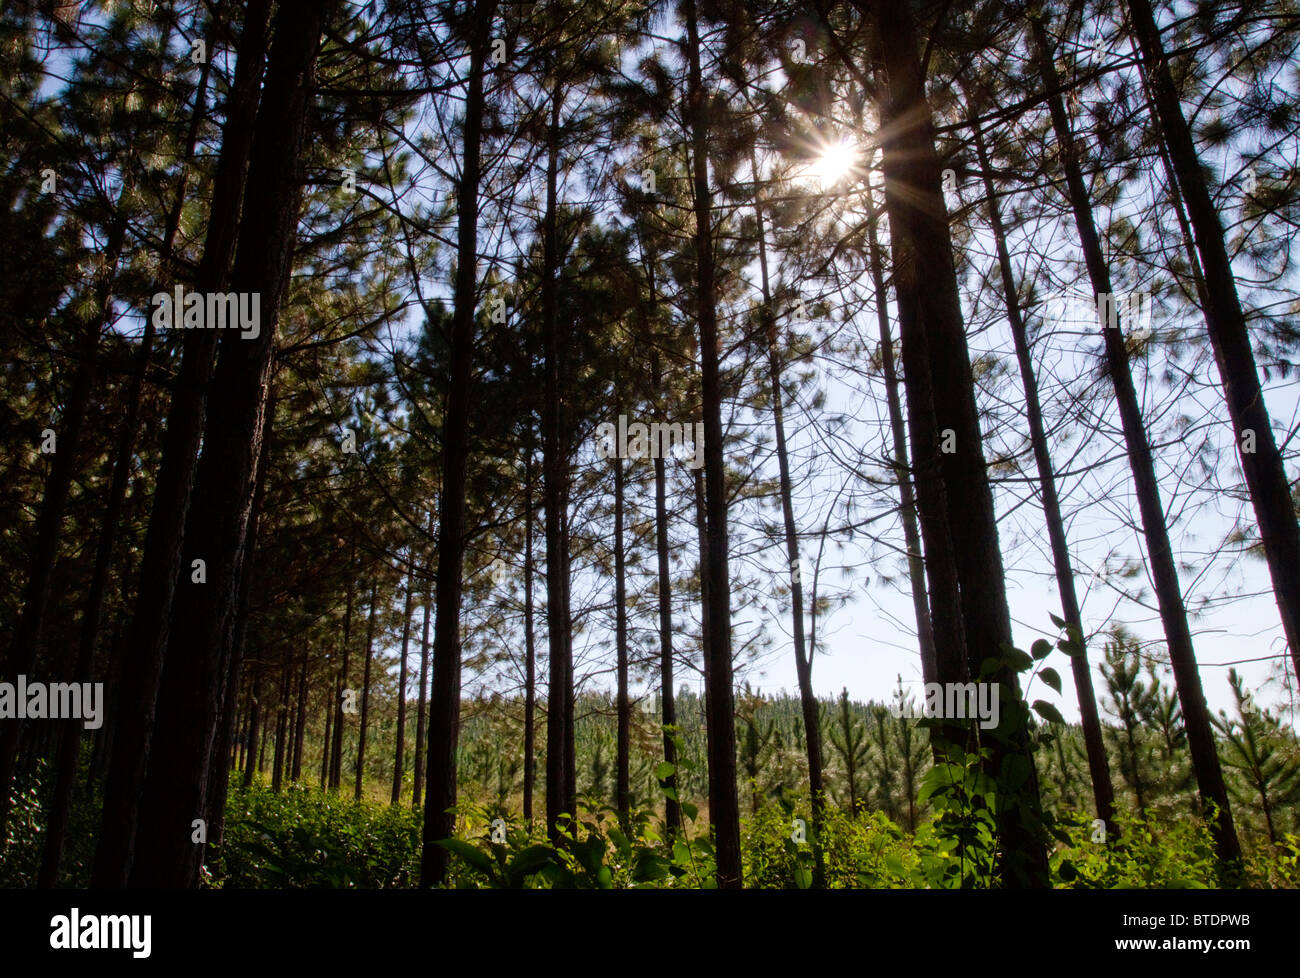 View from inside a pine plantation showing the sun filtering through tops of tall Pine trees Stock Photo